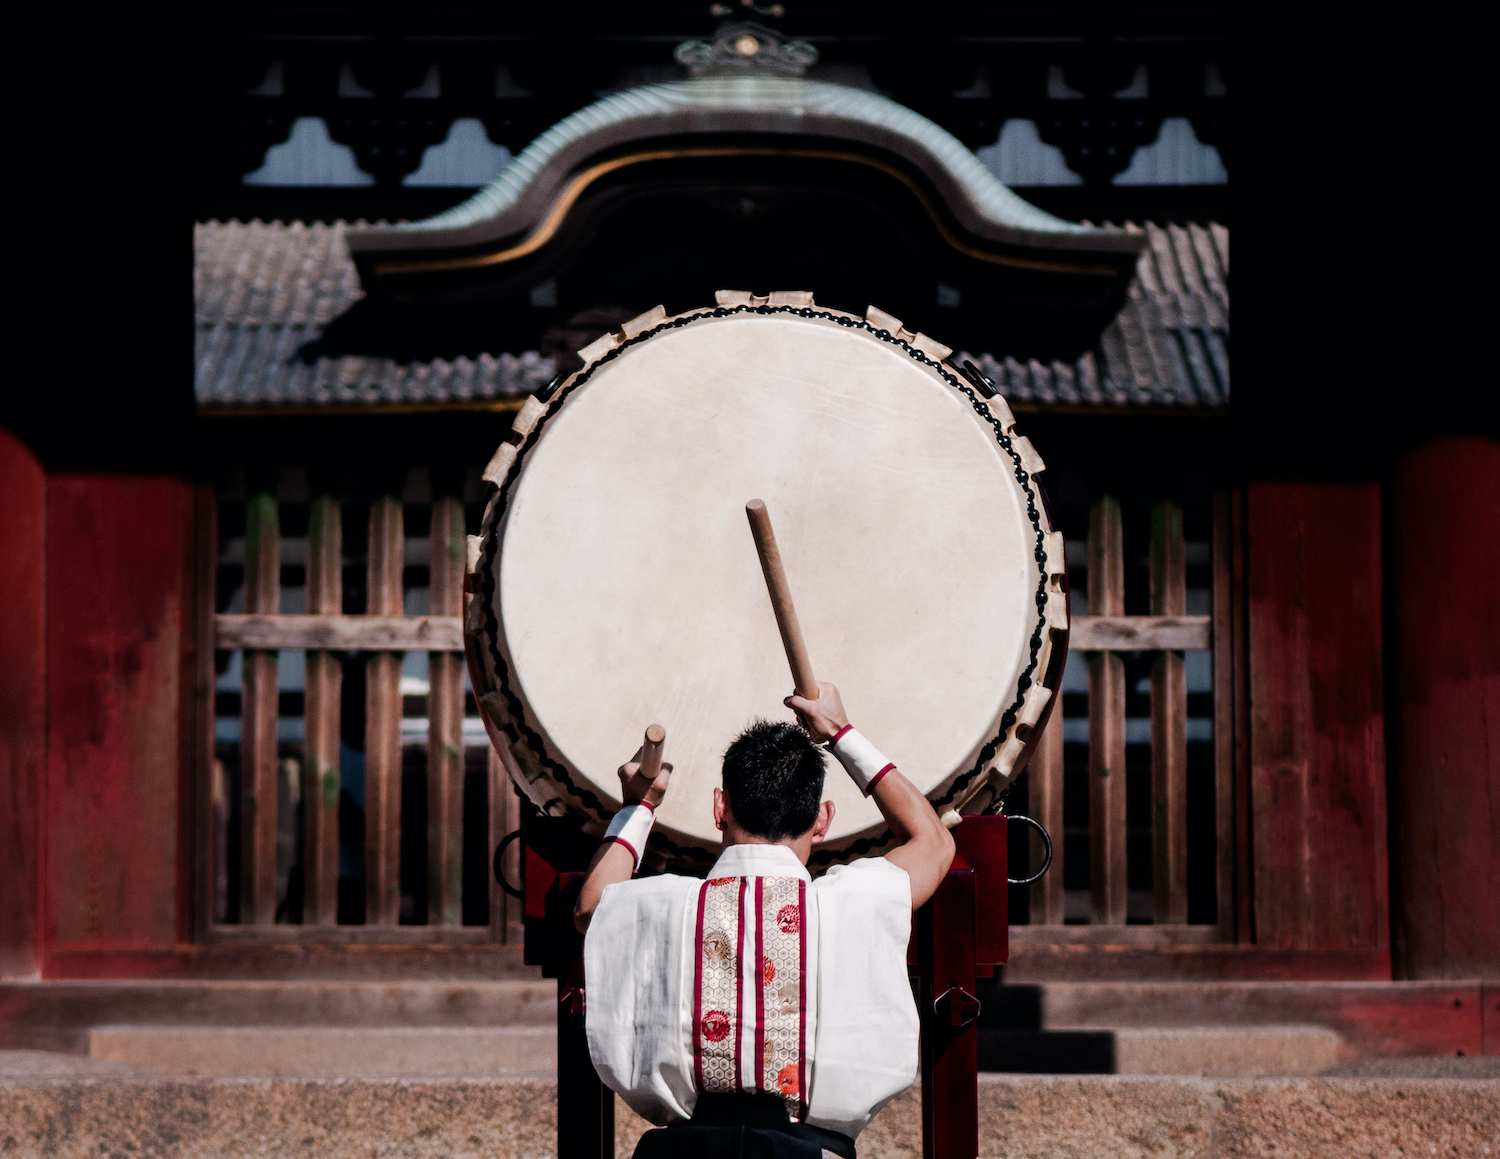 A man performs traditional Japanese Taiko drum.